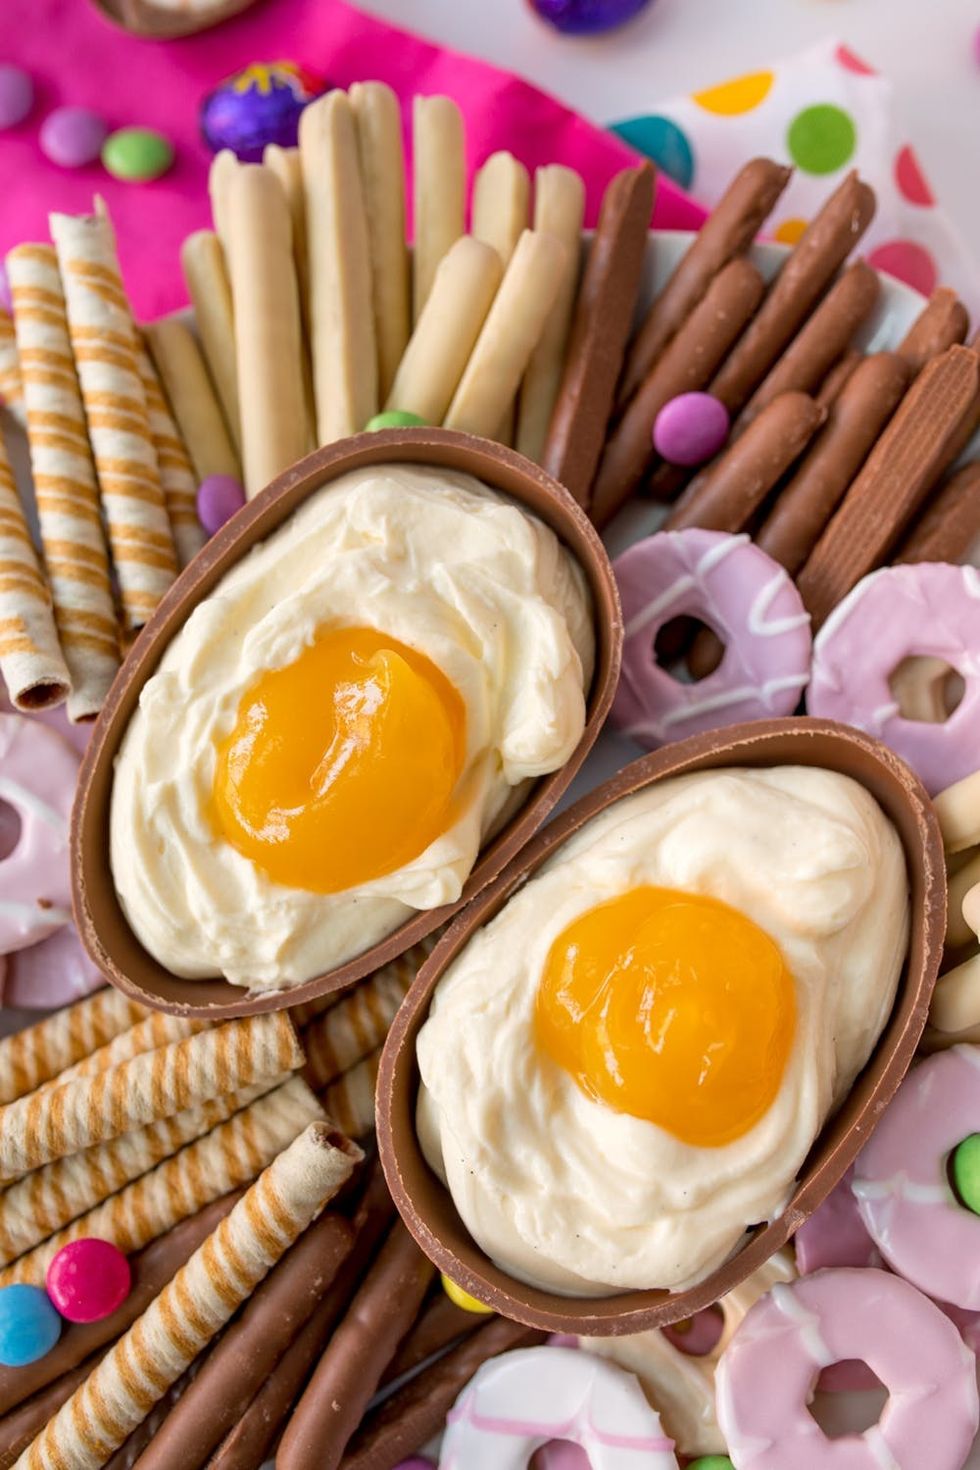 This Giant Cadbury Creme Egg Cheesecake Dip Recipe Is THE Easter Dessert!